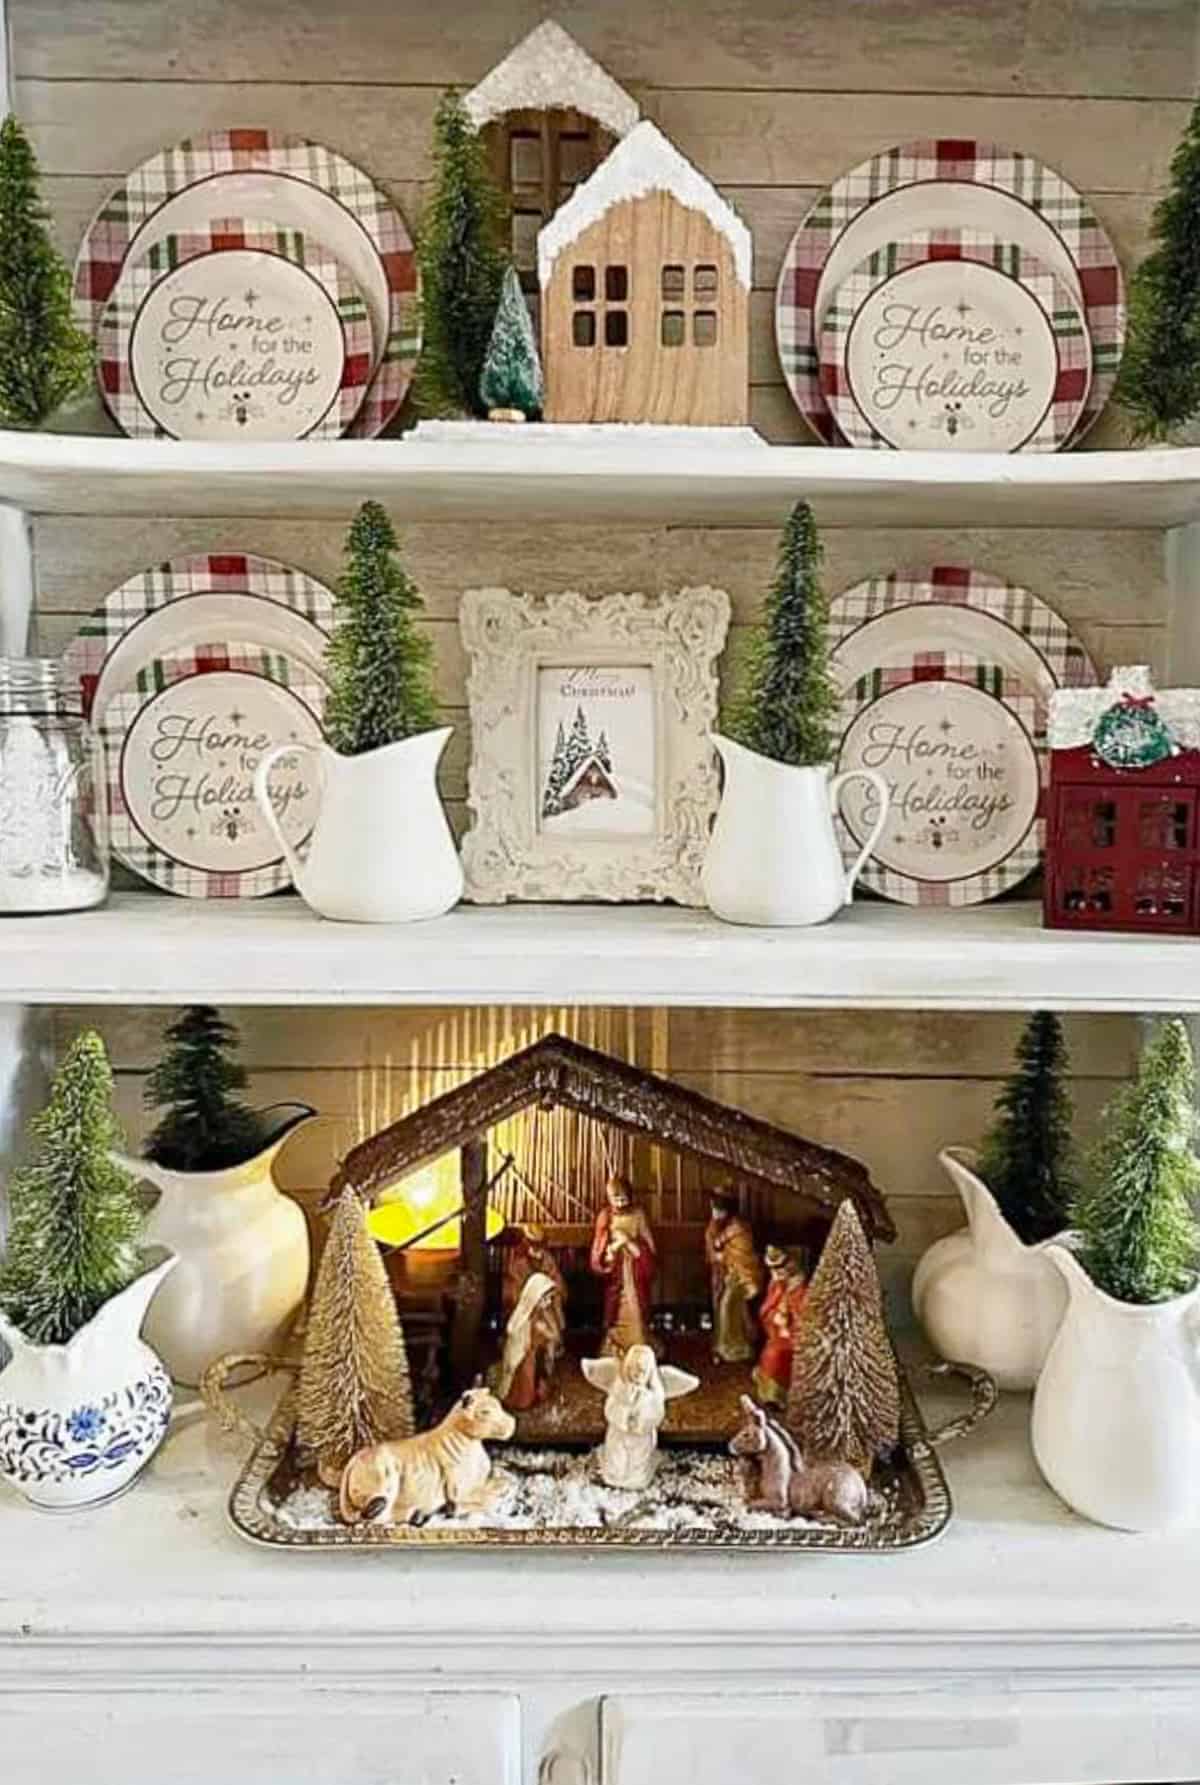 nativity set in a creche on shelves filled with plates